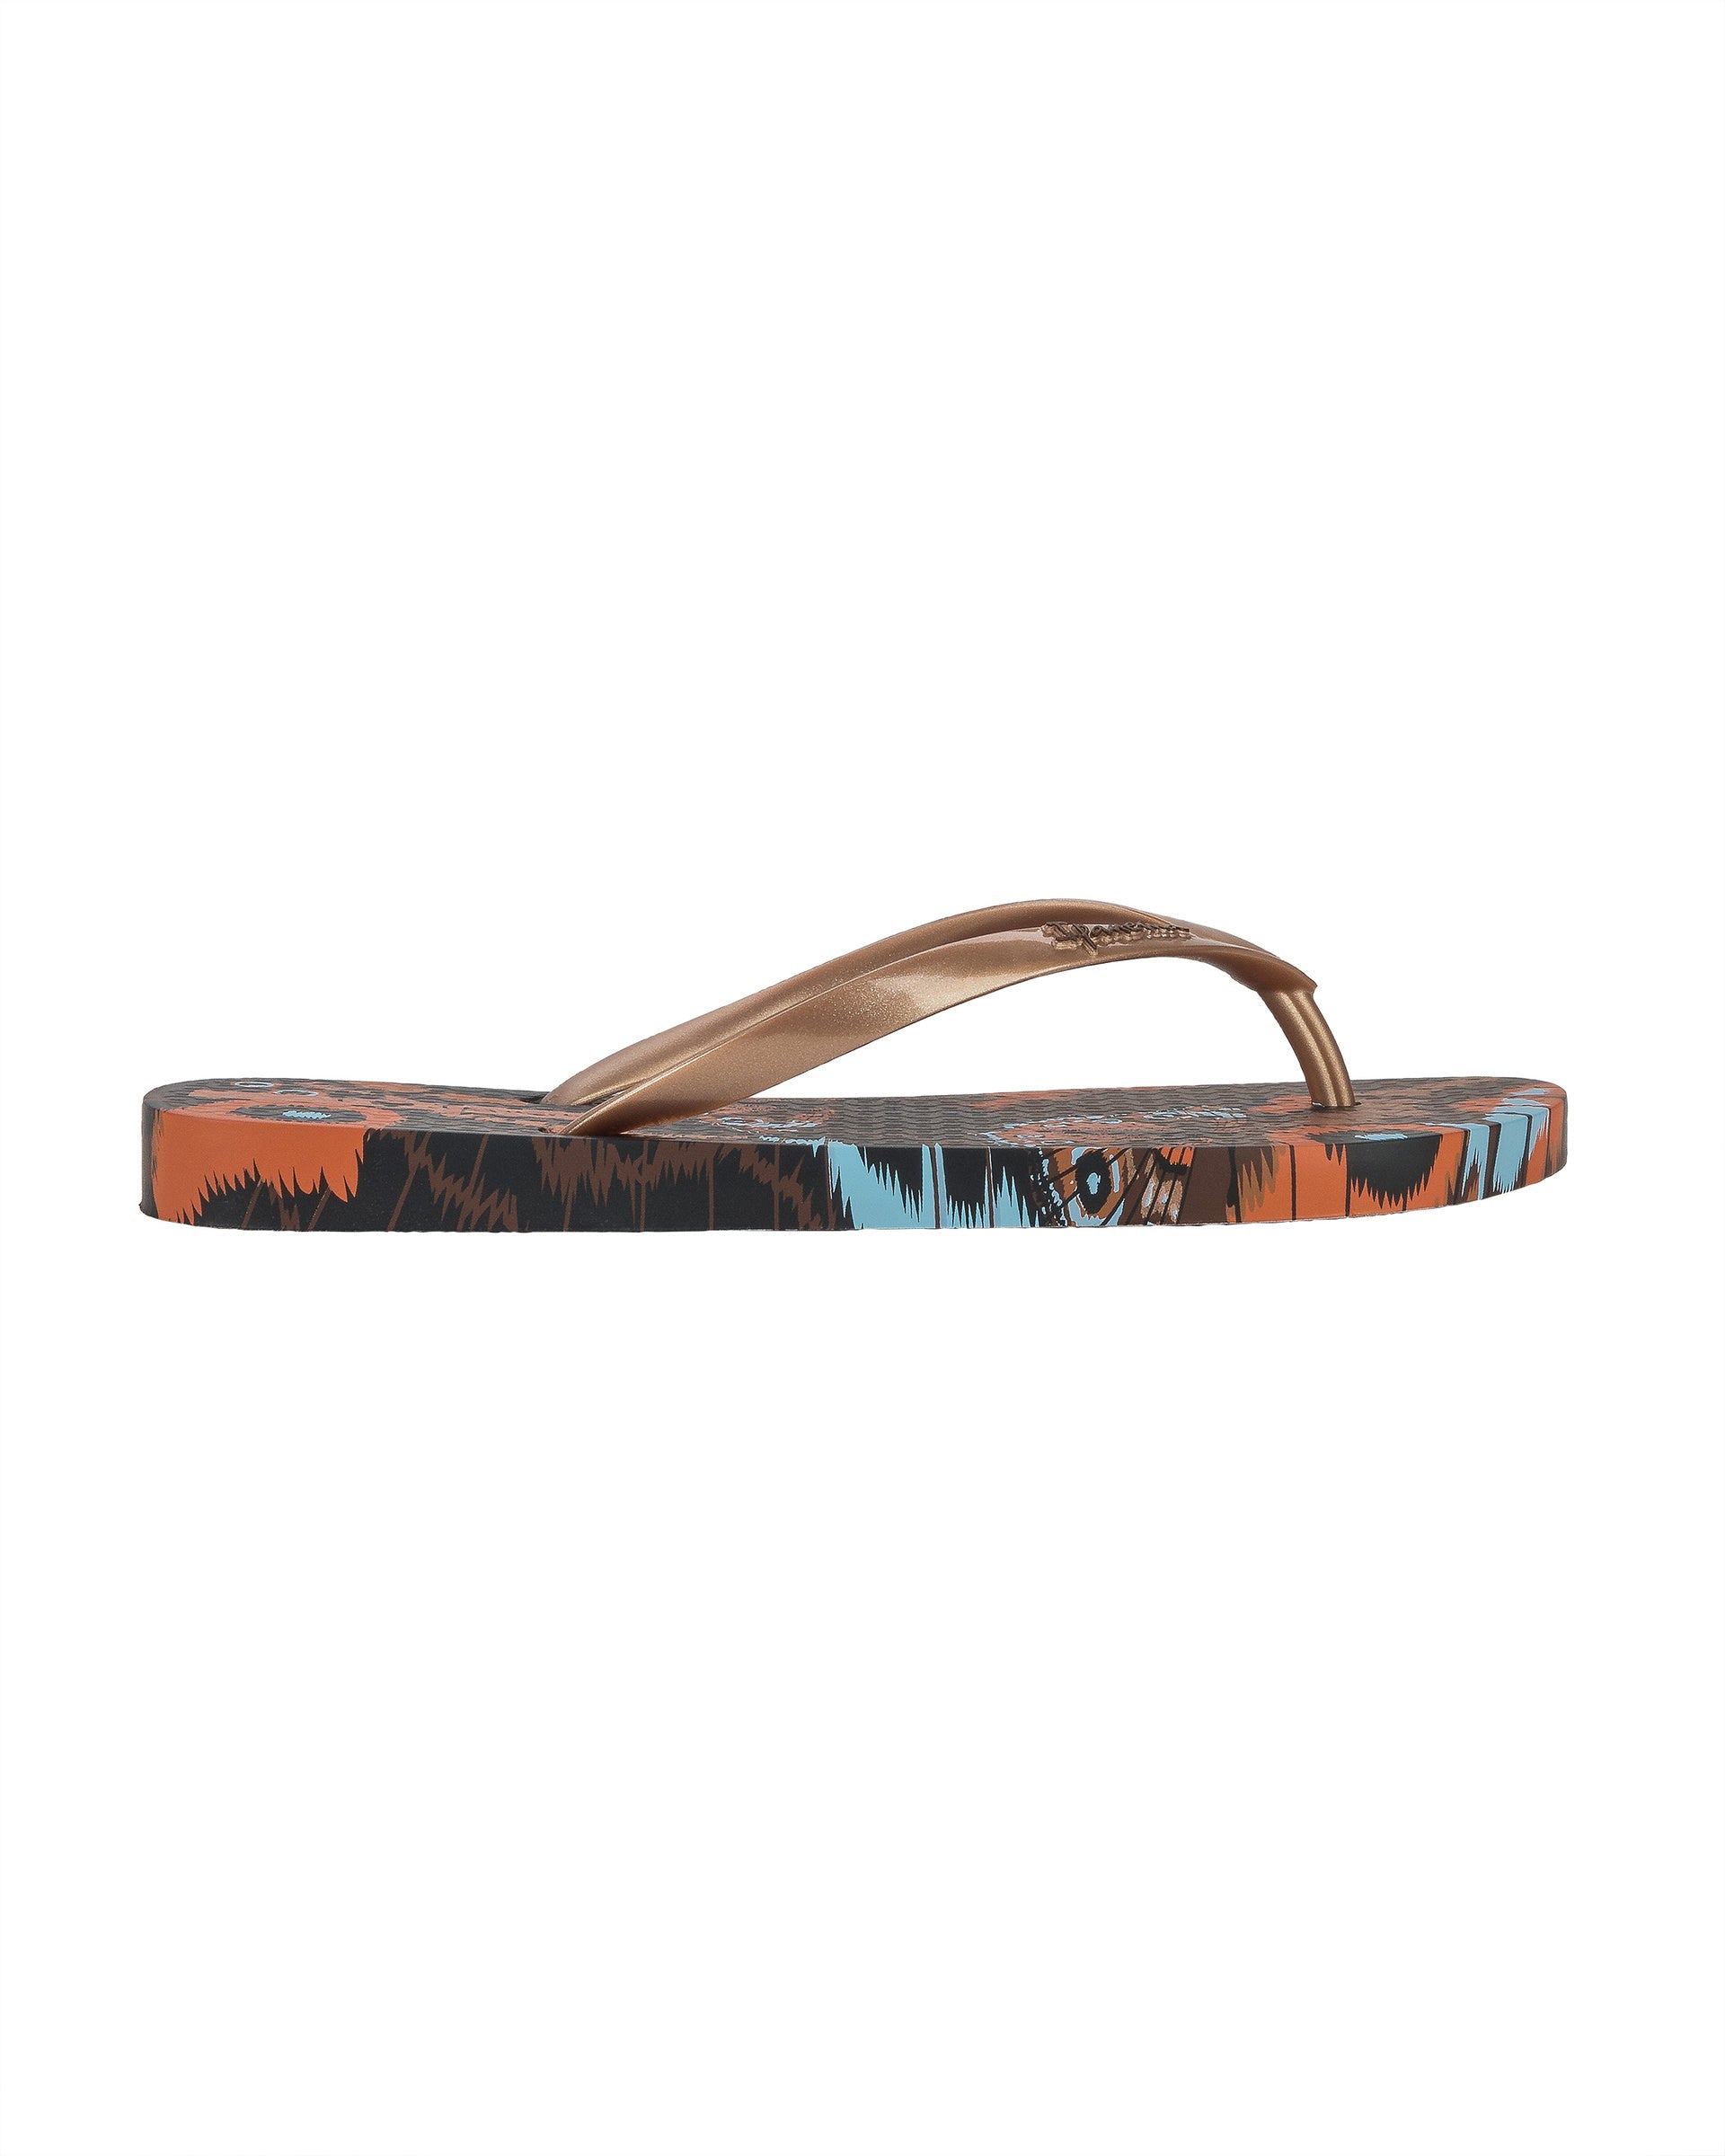 Outer side view of a brown Ipanema Animal Print women's flip flop with glitter pink straps and butterfly sole print.